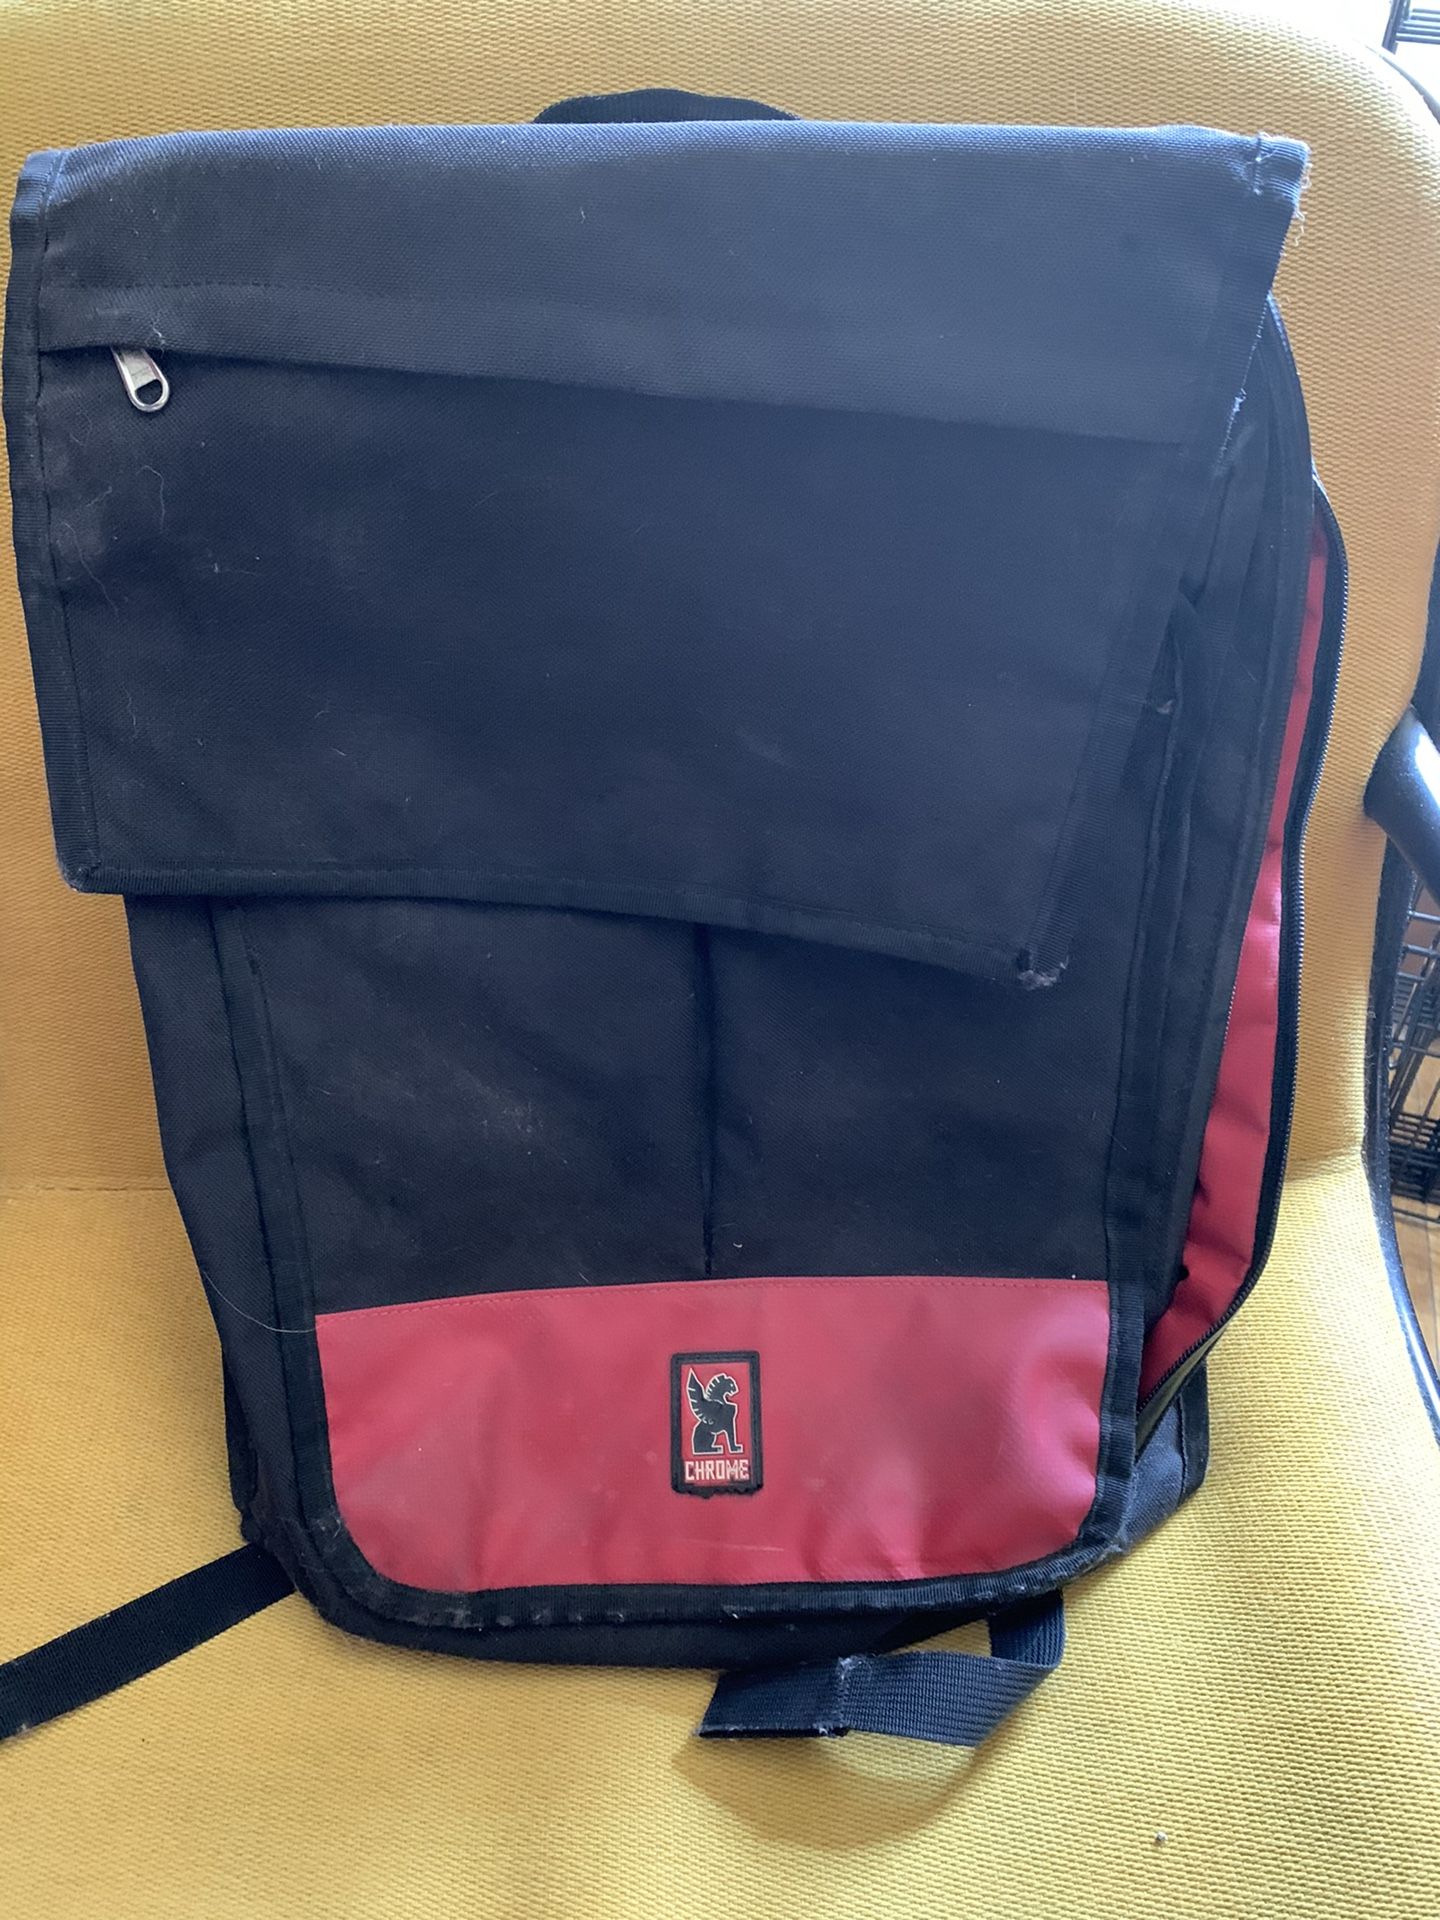 Chrome commuter backpack. Laptop slot and a lot of pockets!